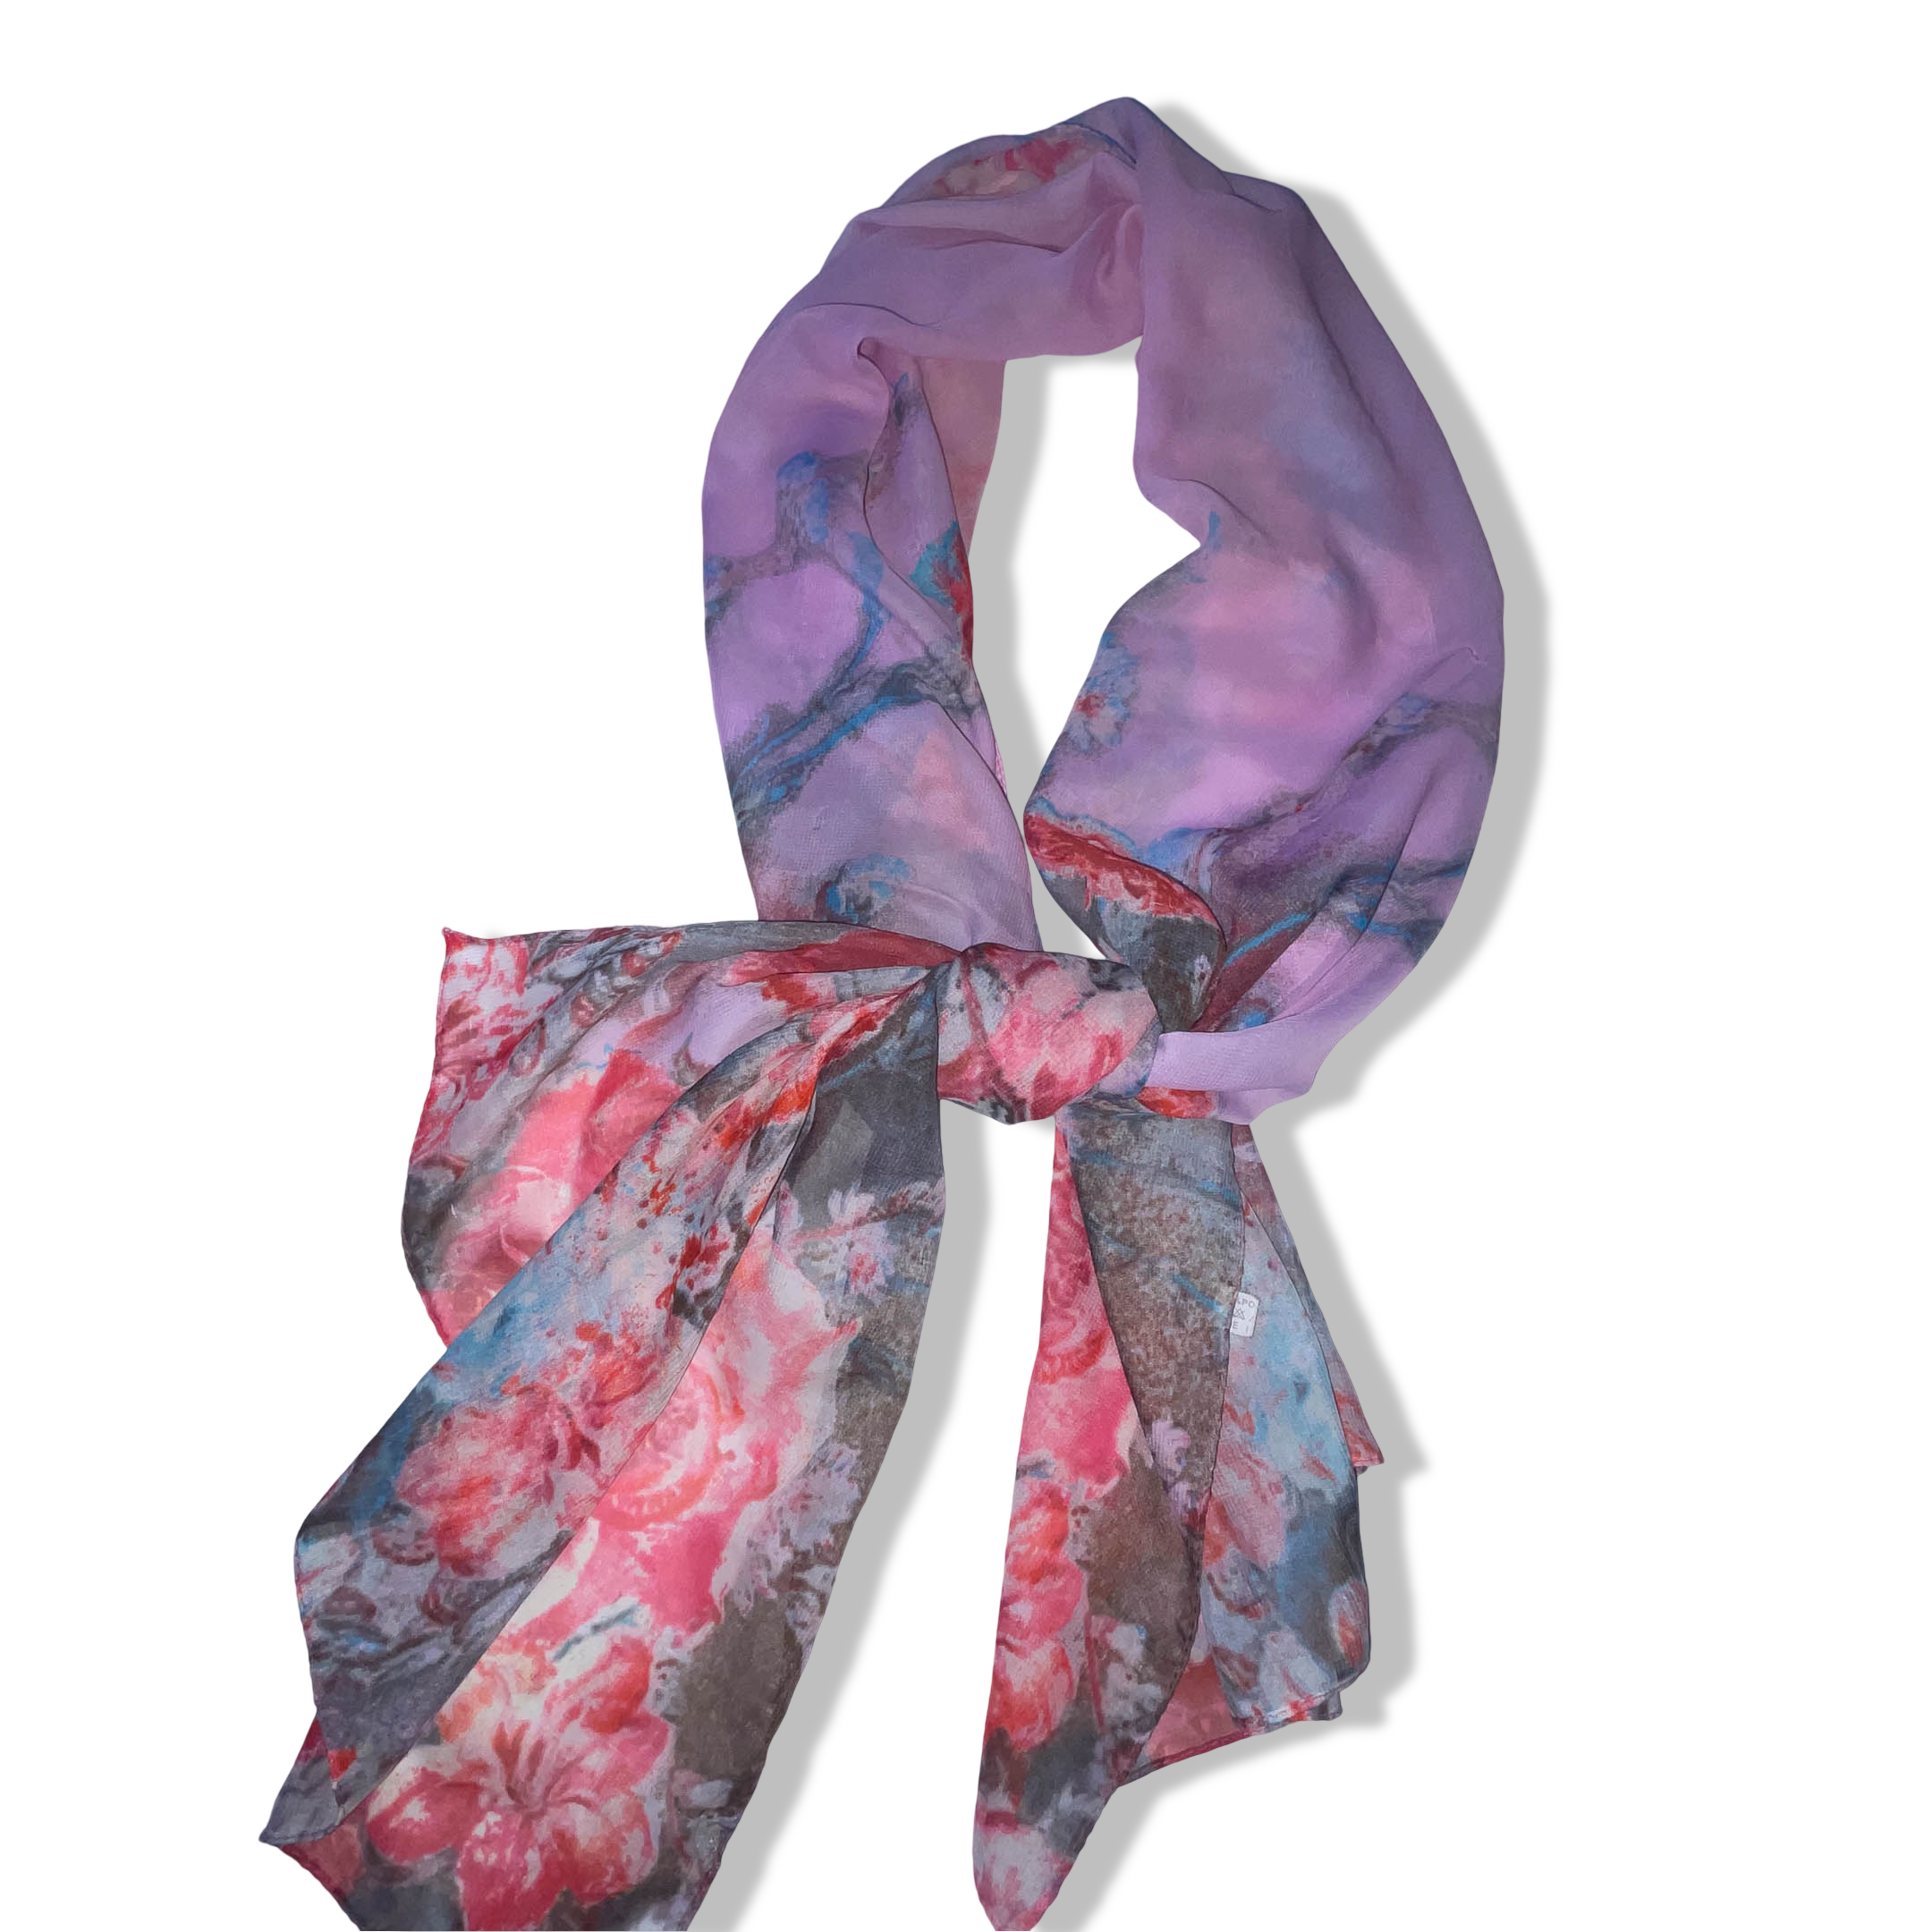 Vintage women's pink cashmere and silk floral scarf L 62 W 19| SKU 3742